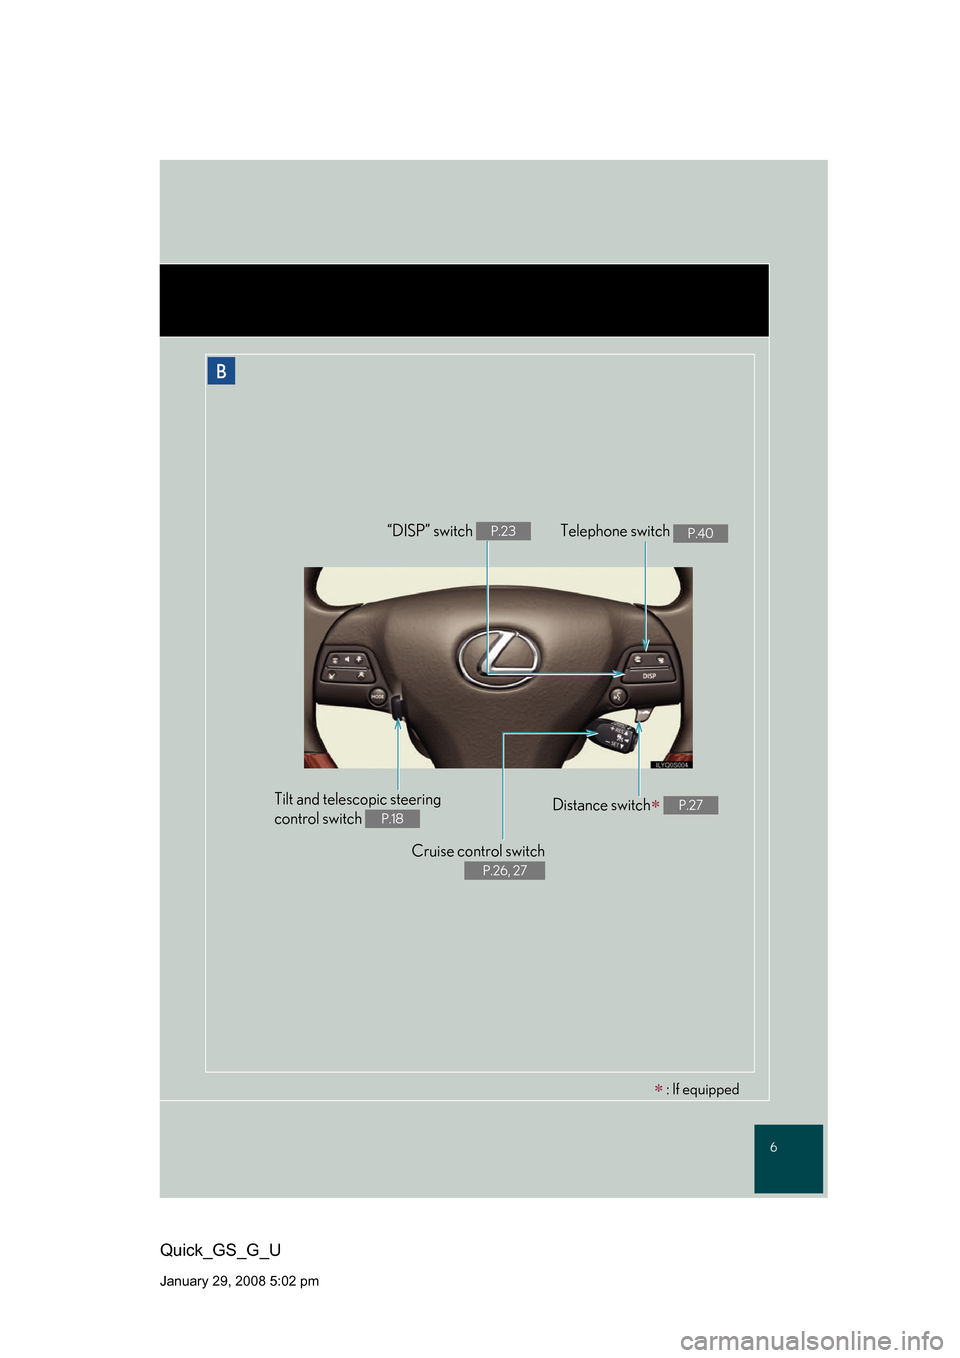 Lexus GS350 2008  Opening, closing and locking the doors and trunk / LEXUS 2008 GS460/350 QUICK GUIDE OWNERS MANUAL (OM30B04U) 6
Quick_GS_G_U
January 29, 2008 5:02 pm
B
Cruise control switch  
P.26, 27
Telephone switch P.40“DISP” switch P.23
Distance switch P.27Tilt and telescopic steering  
control switch 
P.18
